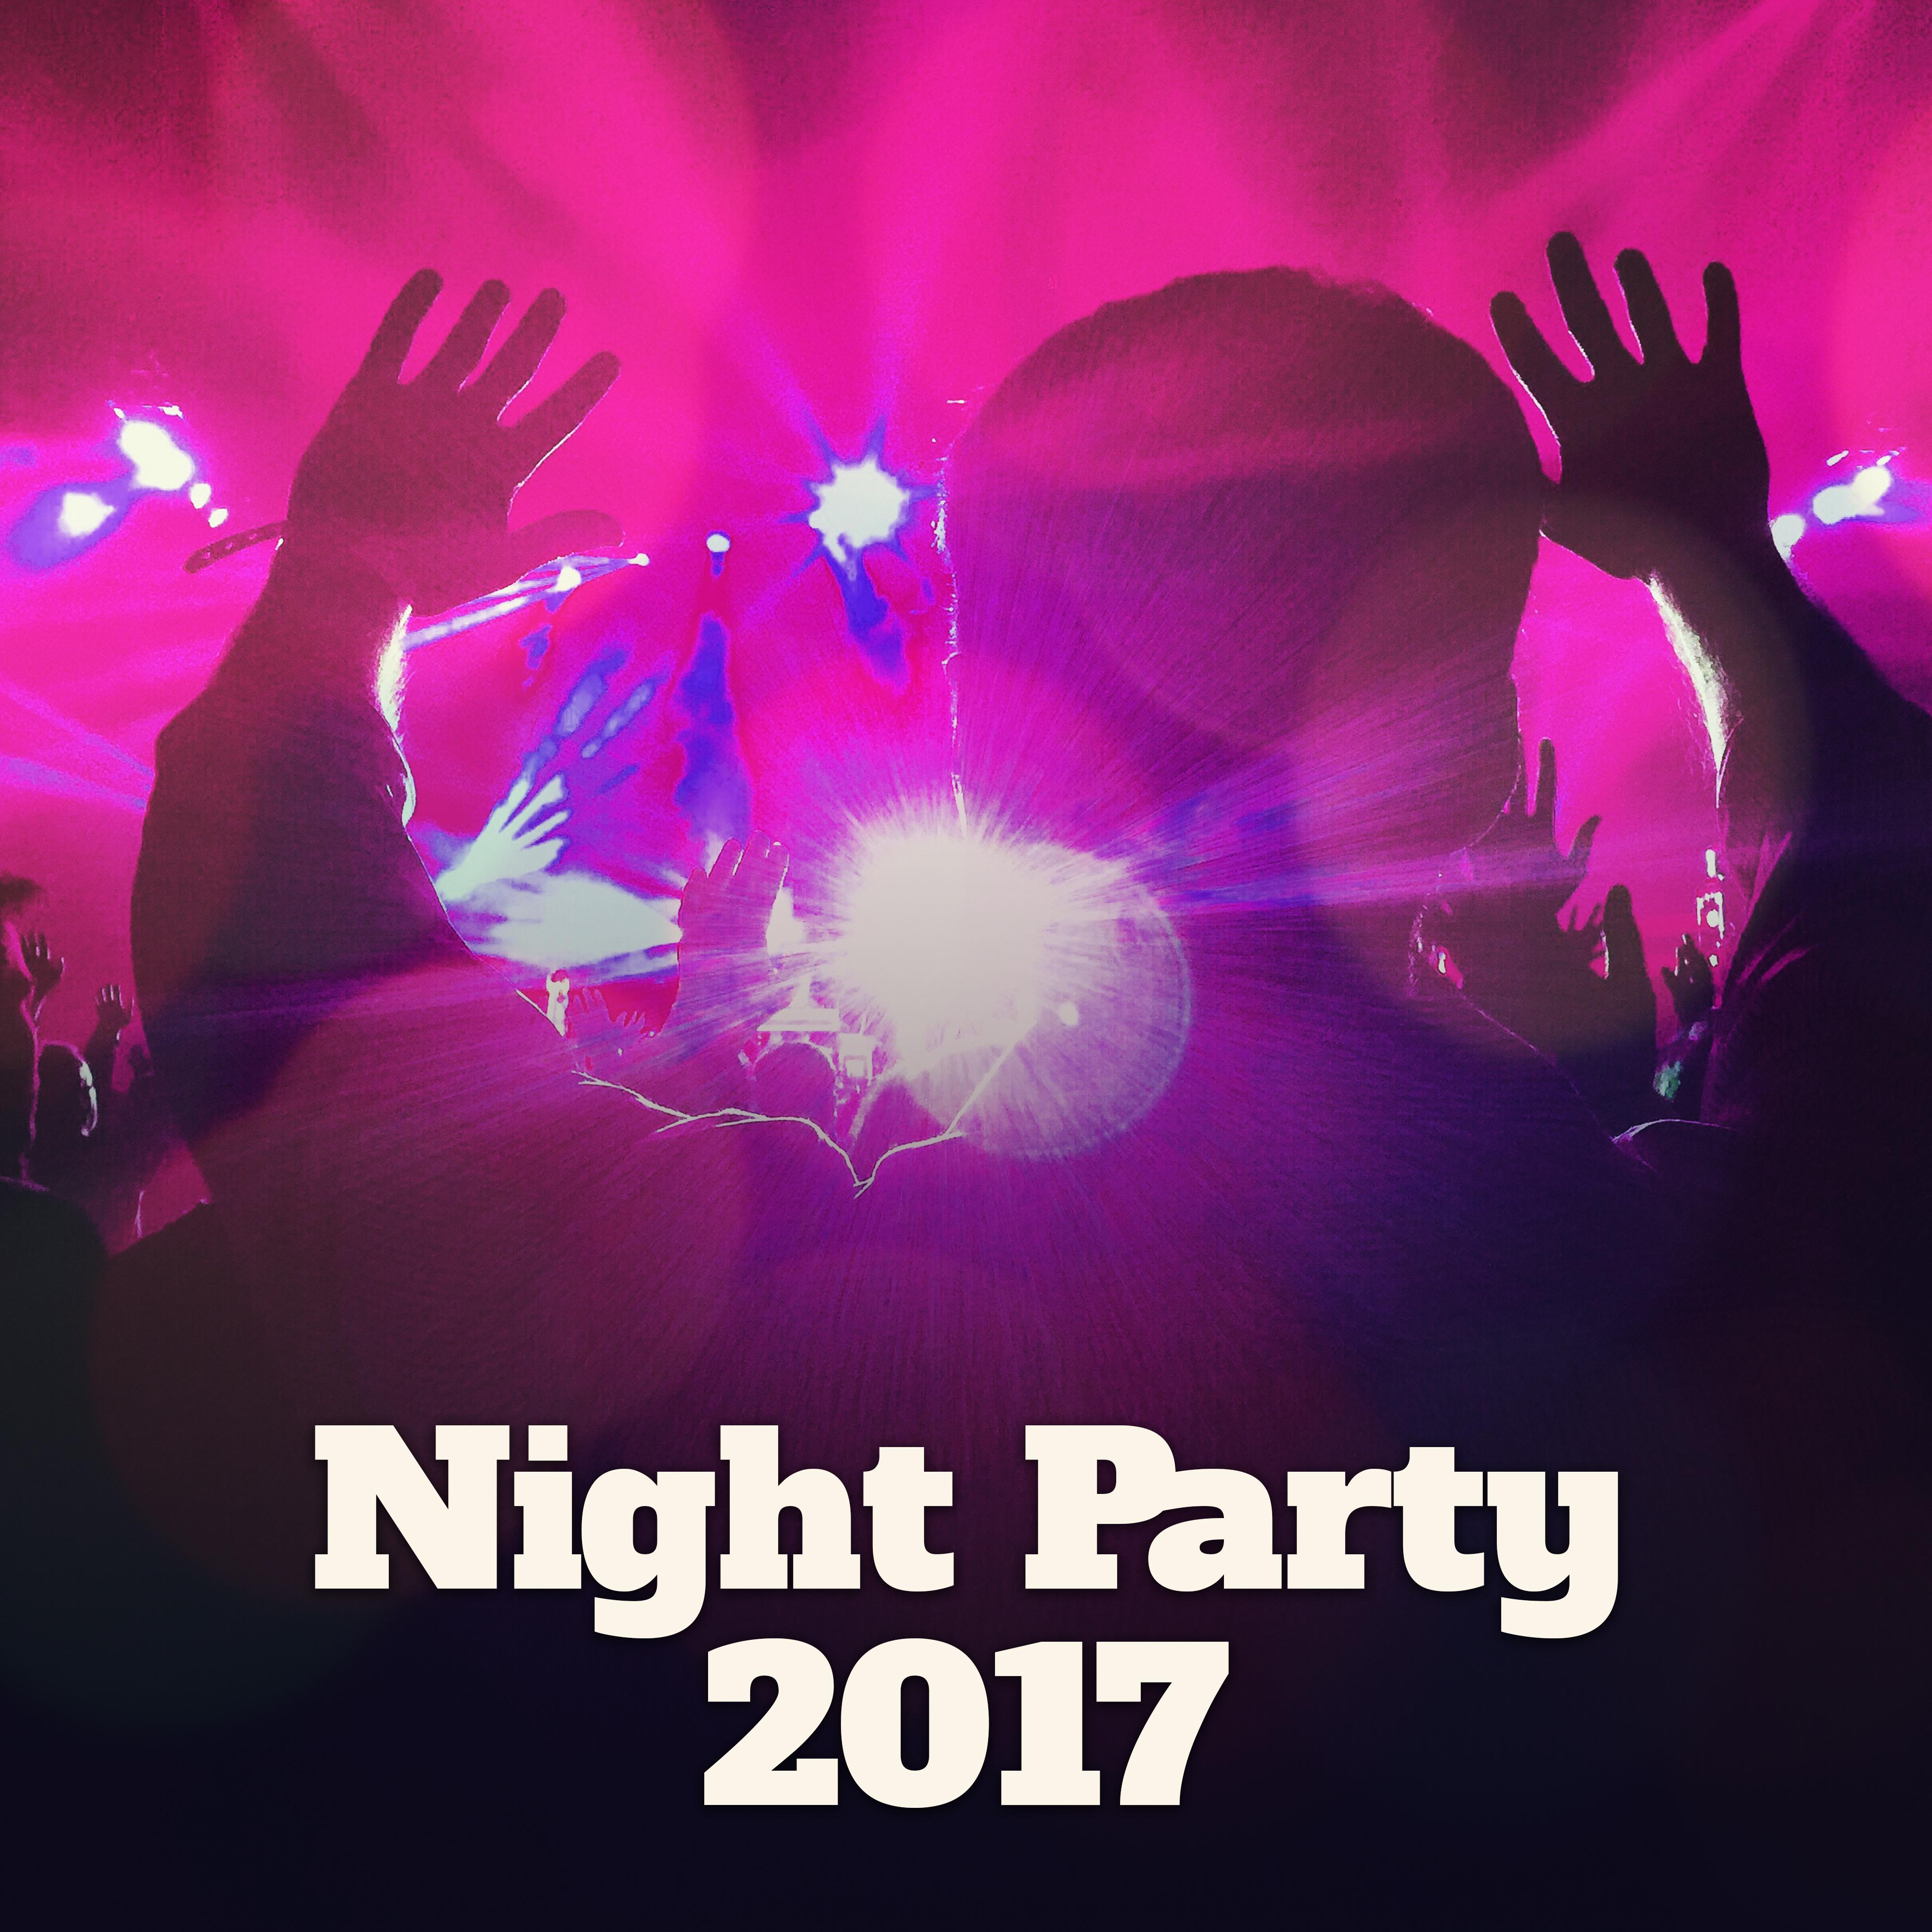 Night Party 2017  Ibiza Lounge, Party Hits, Summer Vibes, Relax Lounge, Chill Out 2017